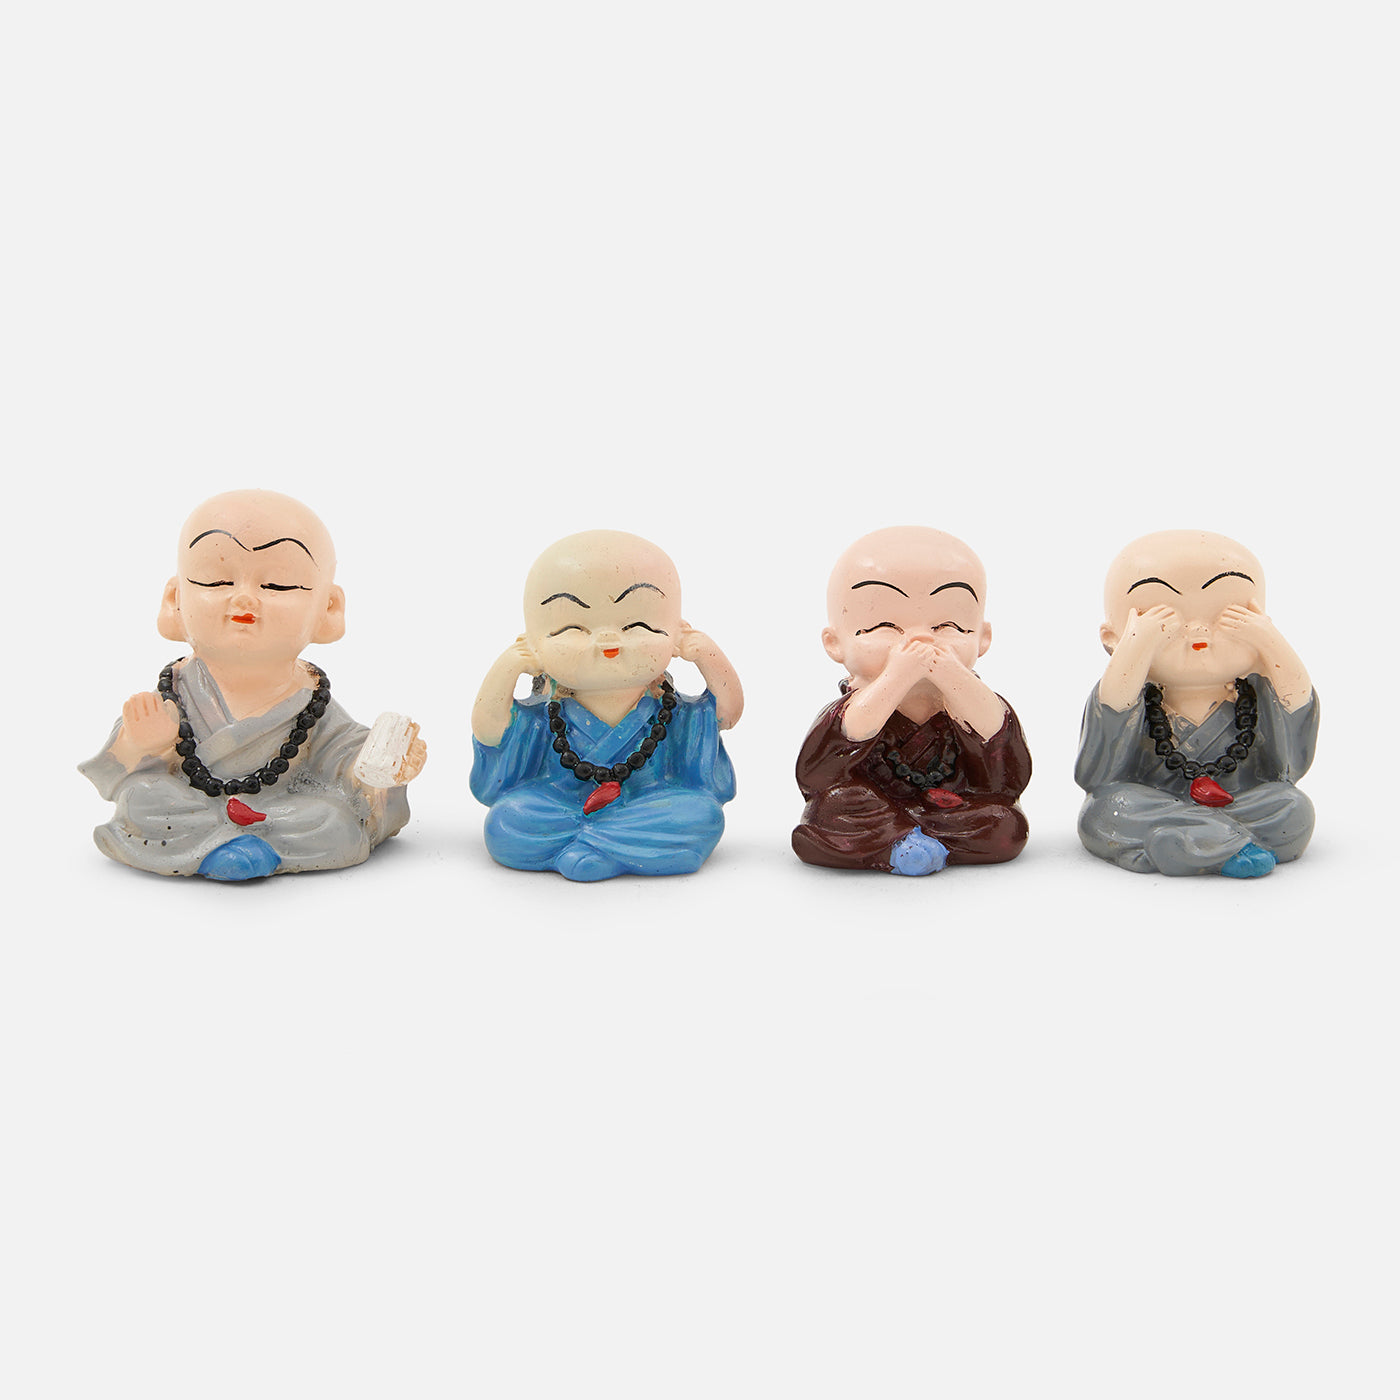 Artistic Resin Buddha Monk Statue Set - Perfect for Home Decor, Car Dashboard, and Thoughtful Gifting